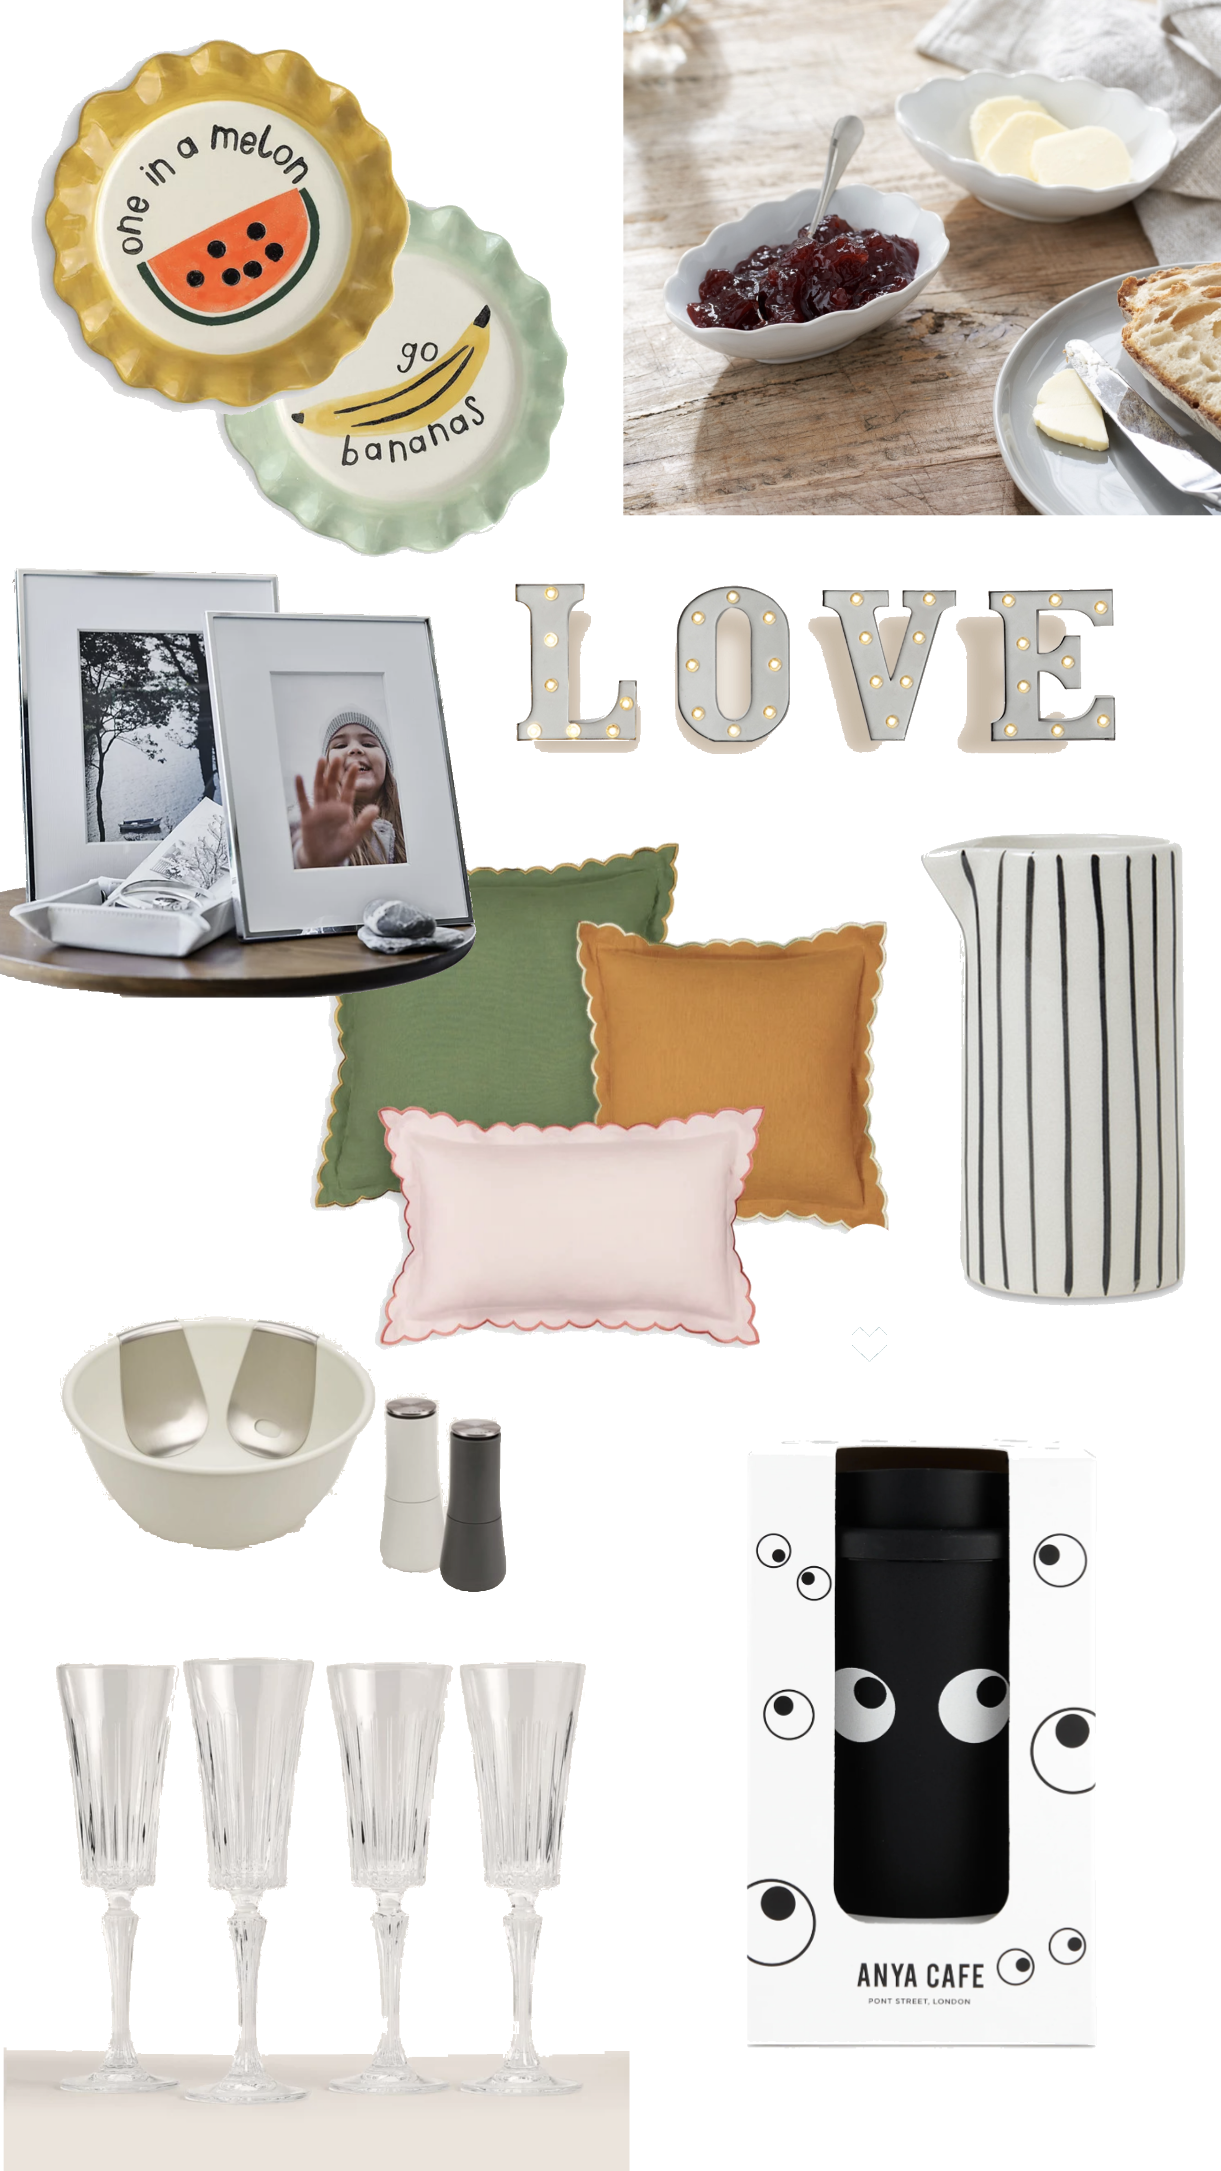 THE HOME GIFT GUIDE